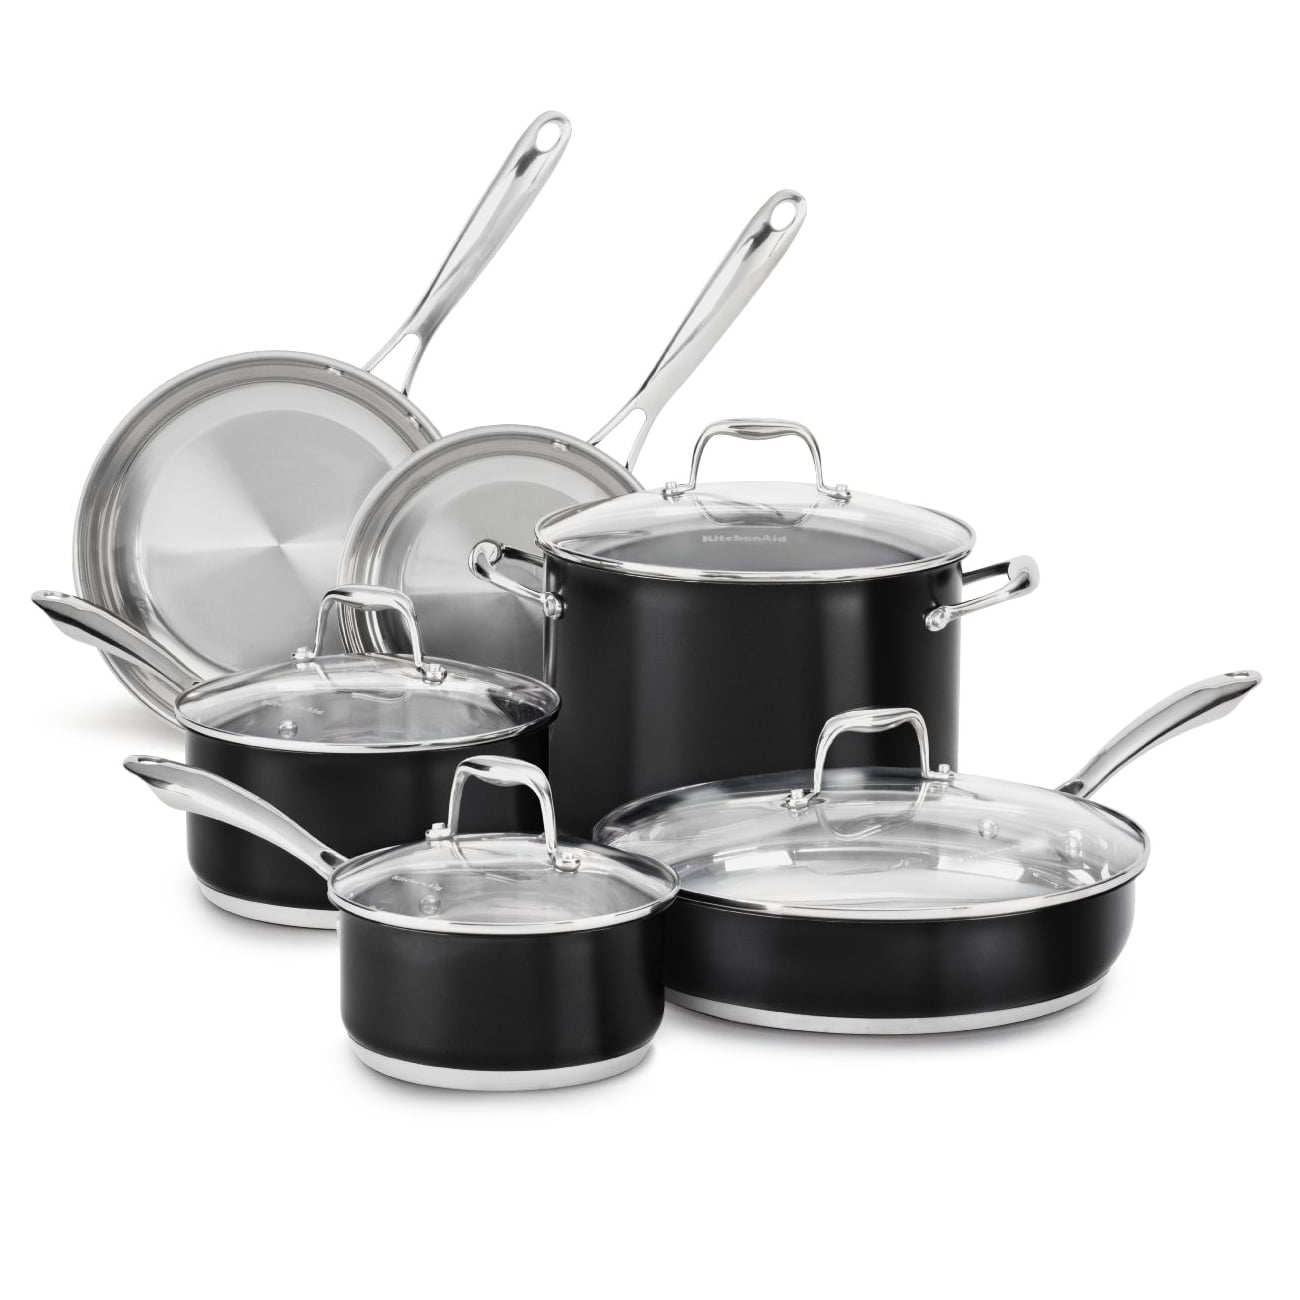 KitchenAid KCSS10OB 10 Piece Onyx Black Stainless Steel Cookware Set Kitchenaid 10 Piece Stainless Steel Cookware